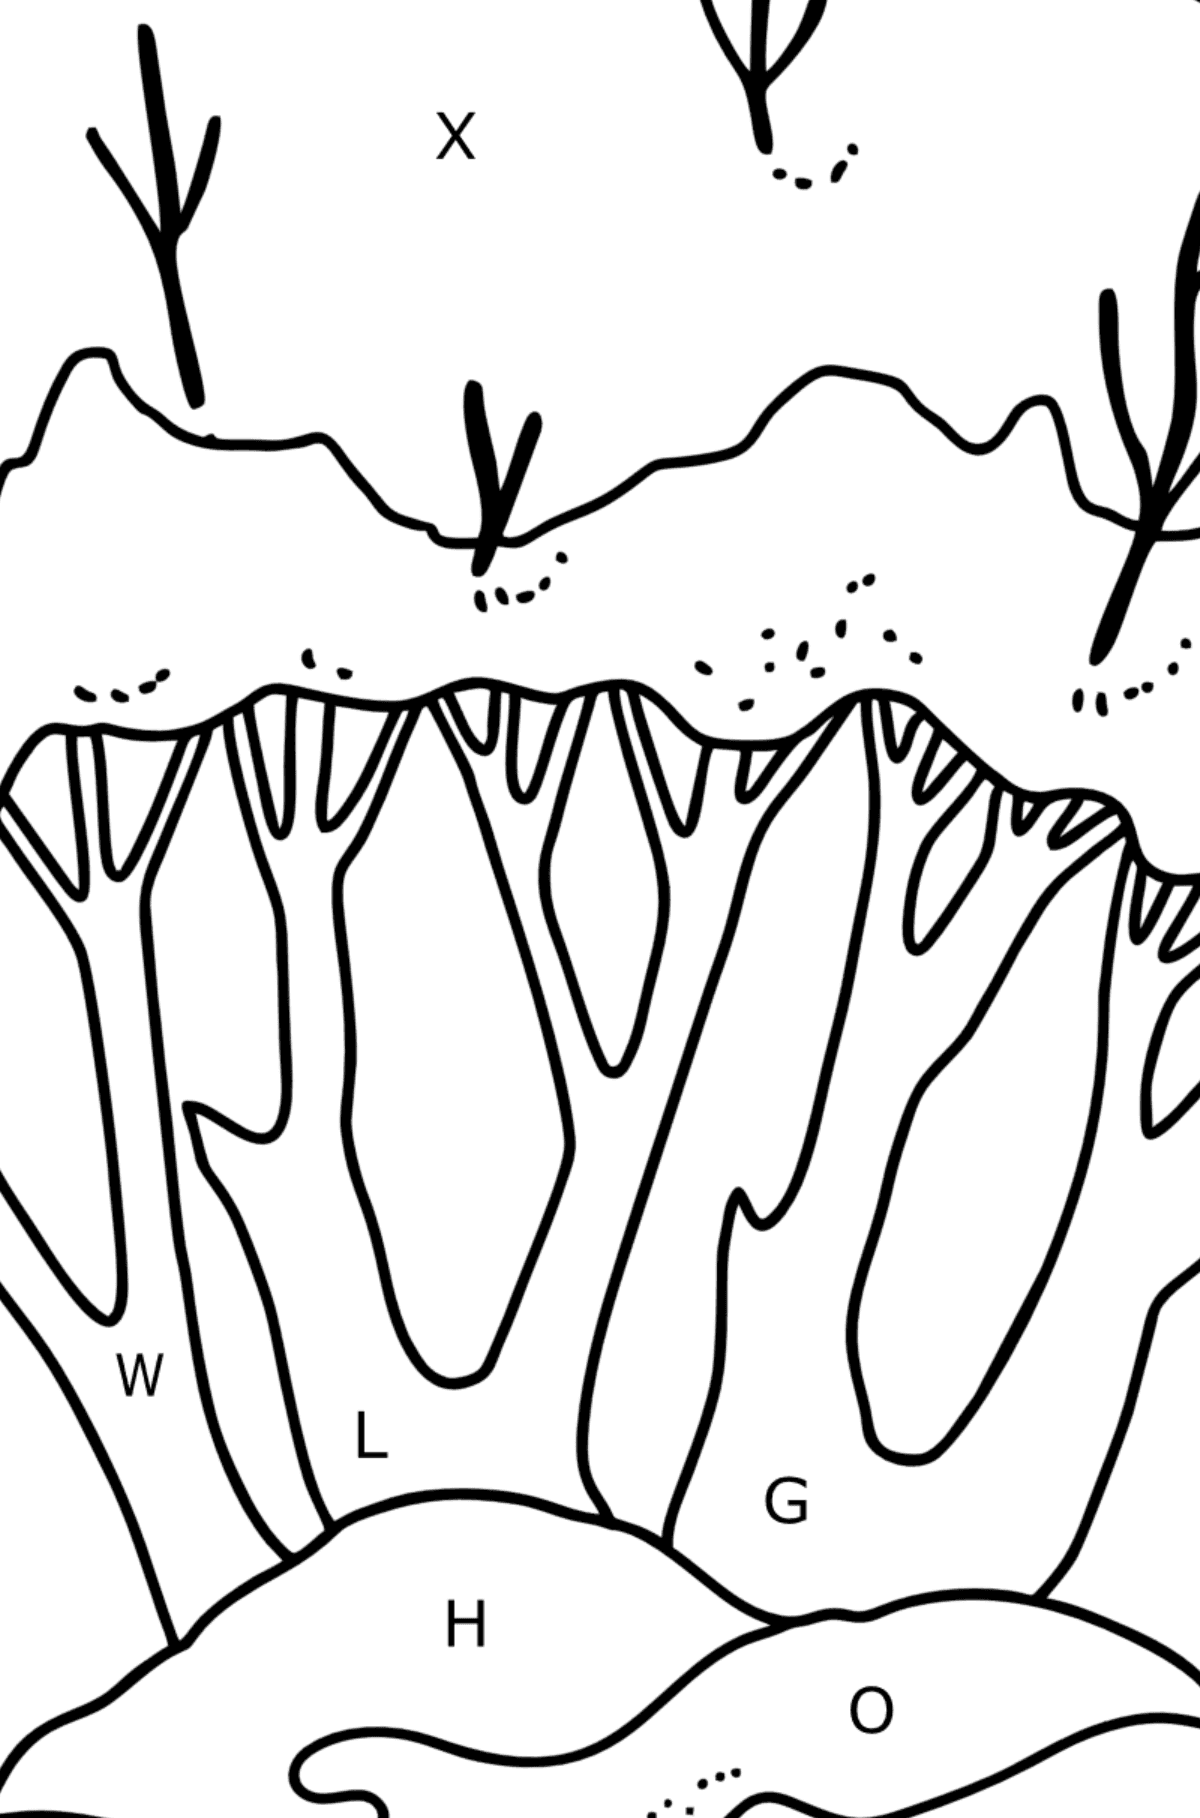 Winter Trees coloring page - Coloring by Letters for Kids